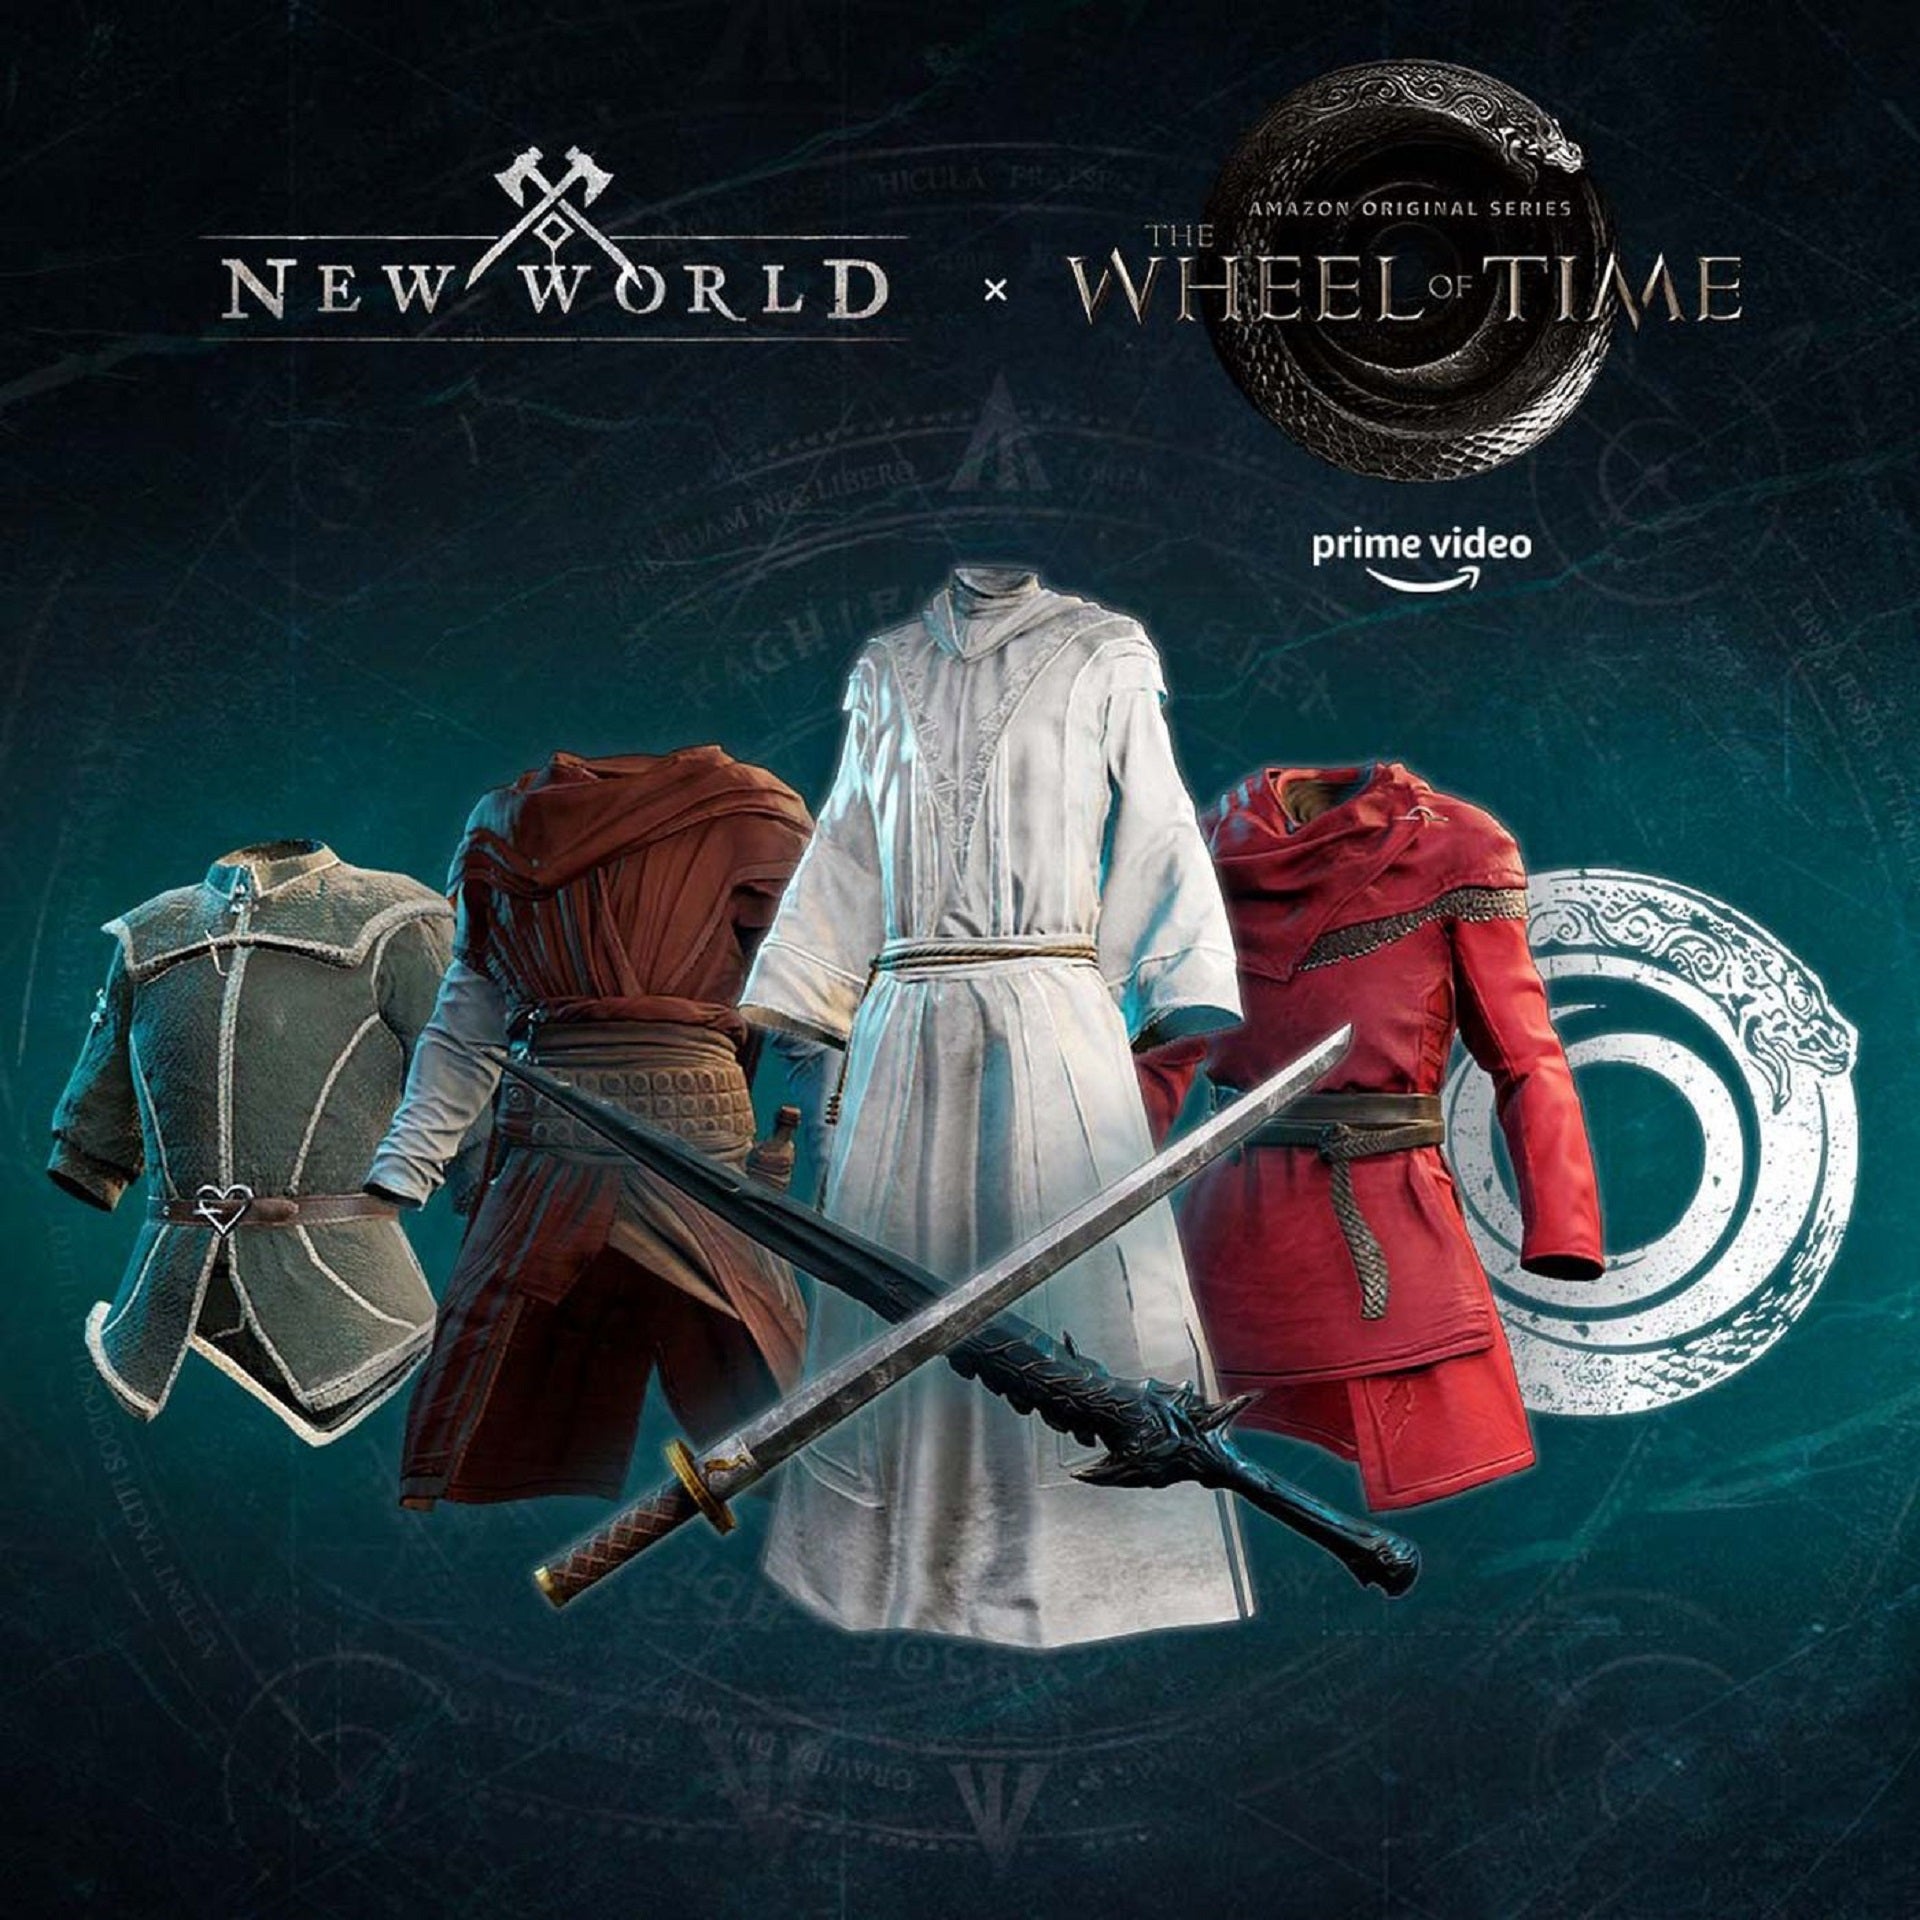 A promotional image for the New World Wheel of Time Crossover event, displaying the Amazon logo and the seven items available to claim in-game, including four coats, two swords, and a decal.